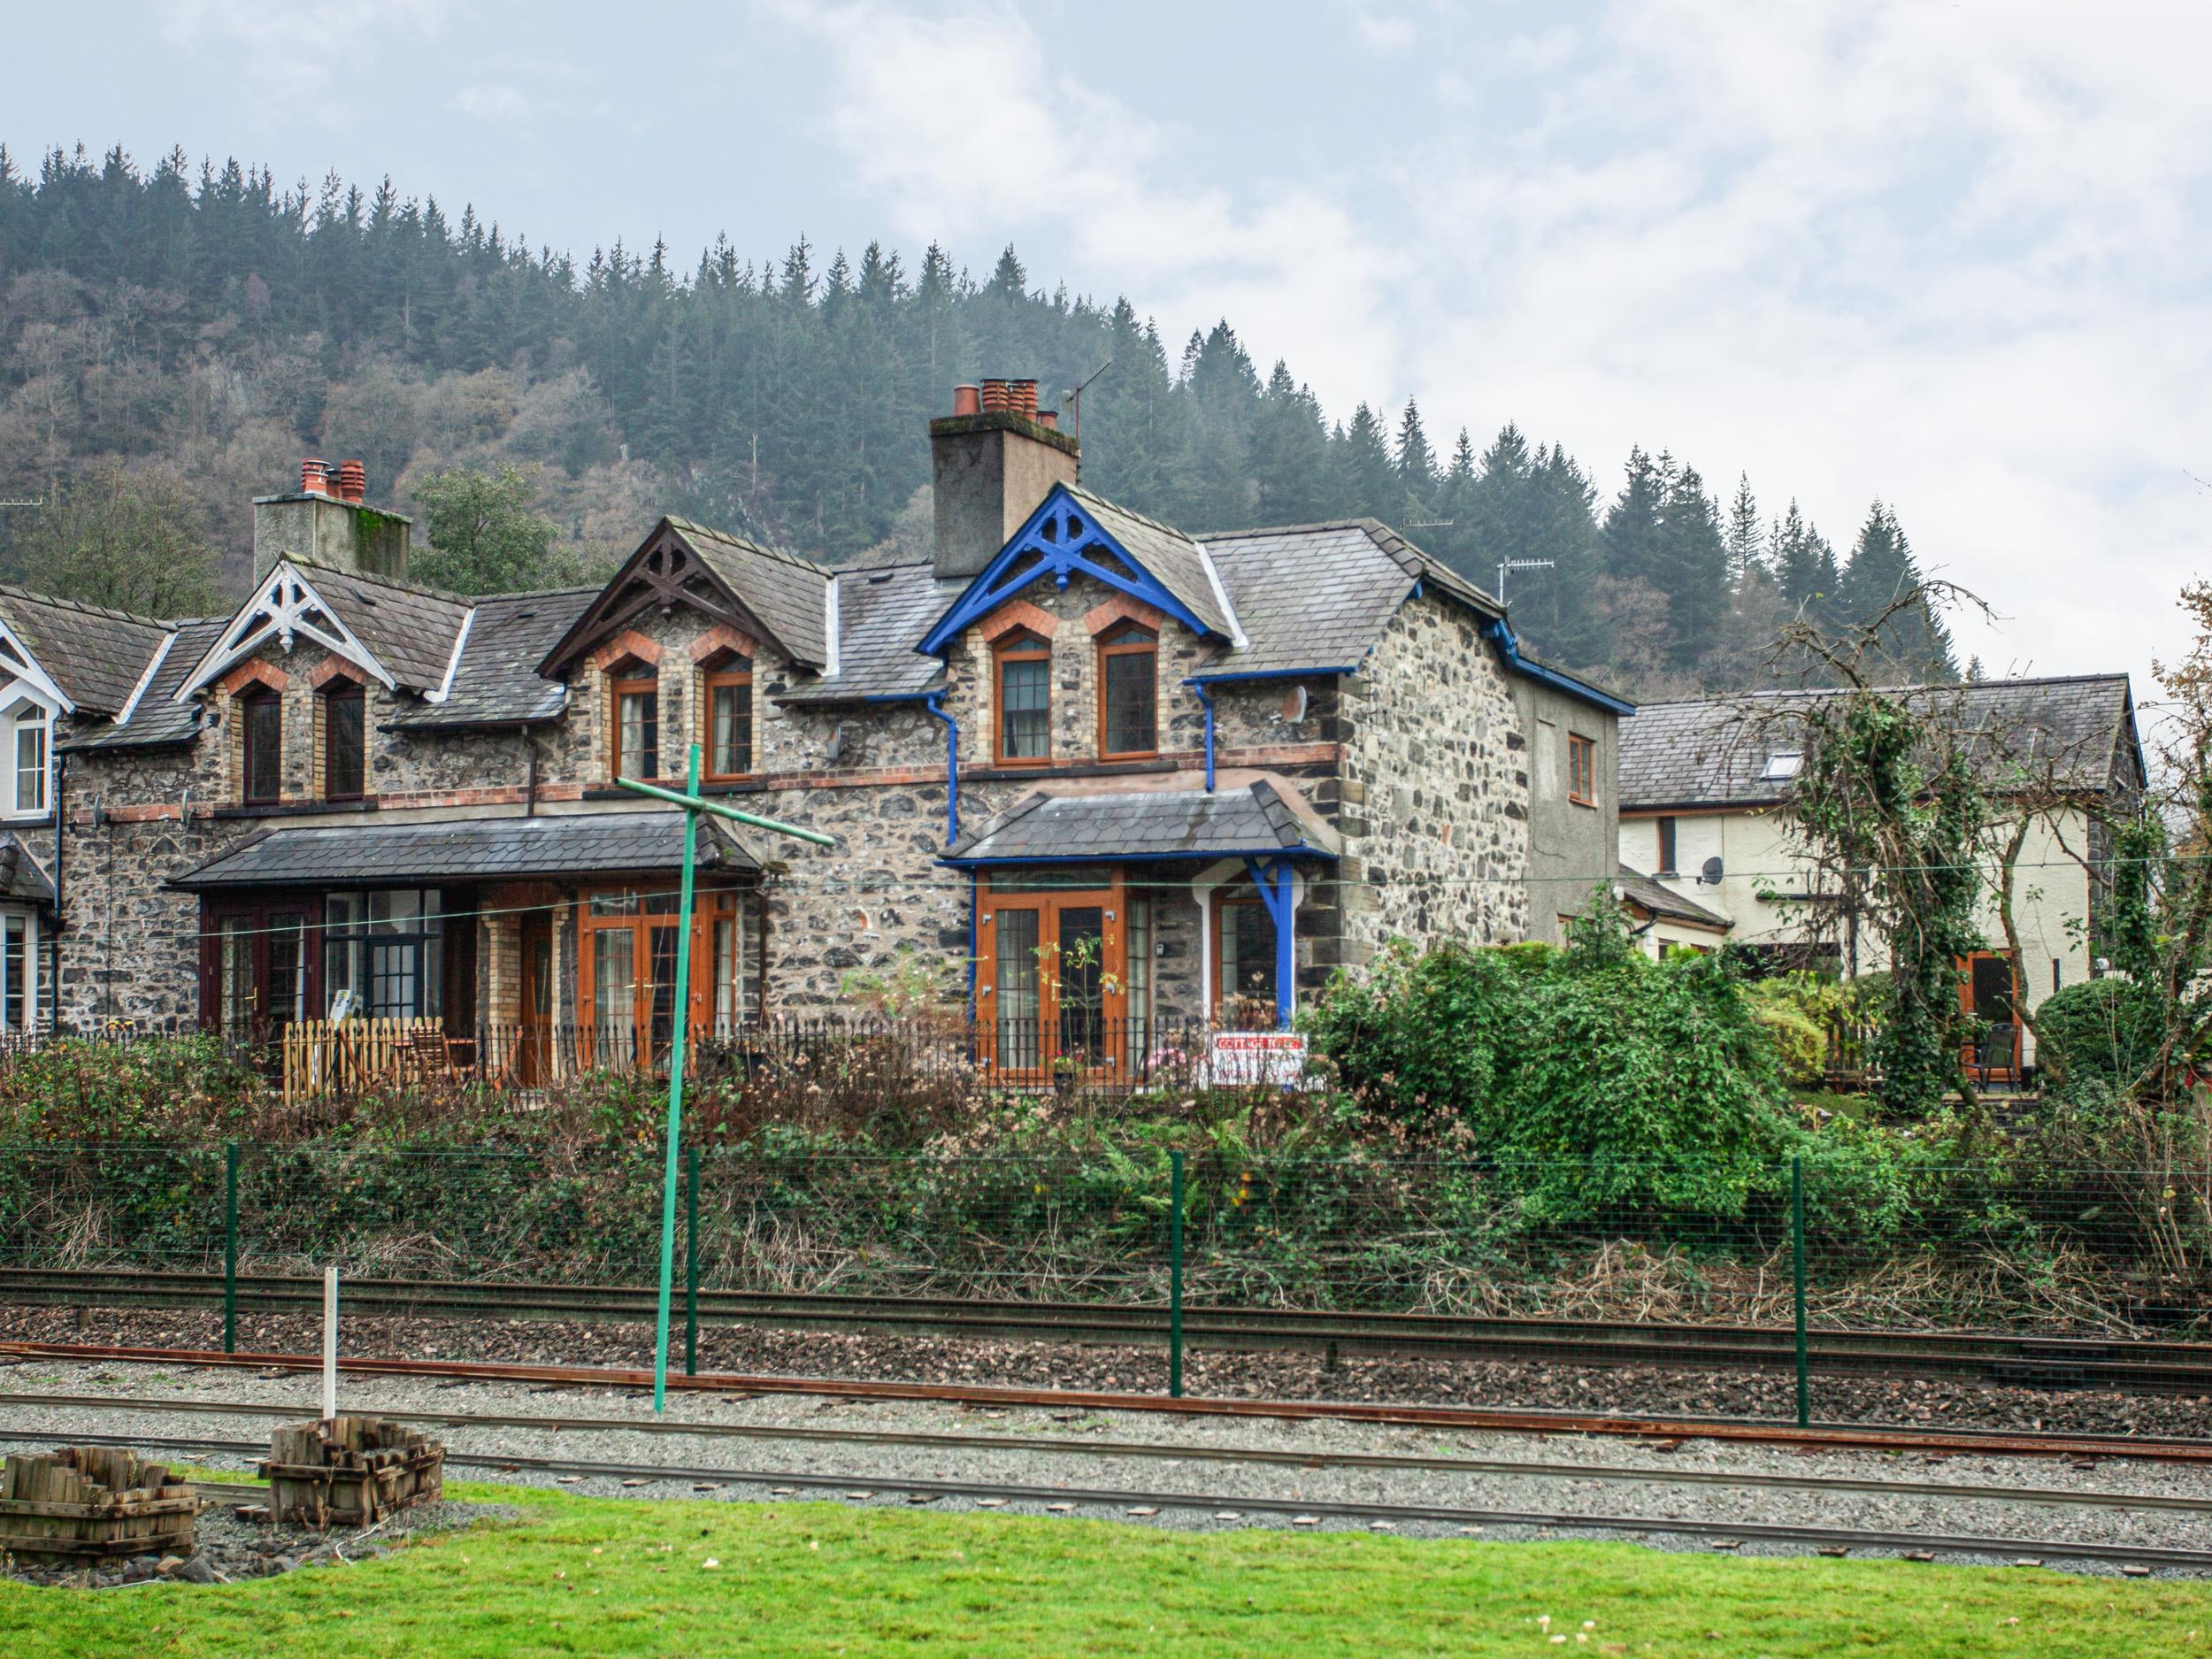 No 1 Railway Cottages Betws Y Coed Conwy Cottage Holiday Reviews 